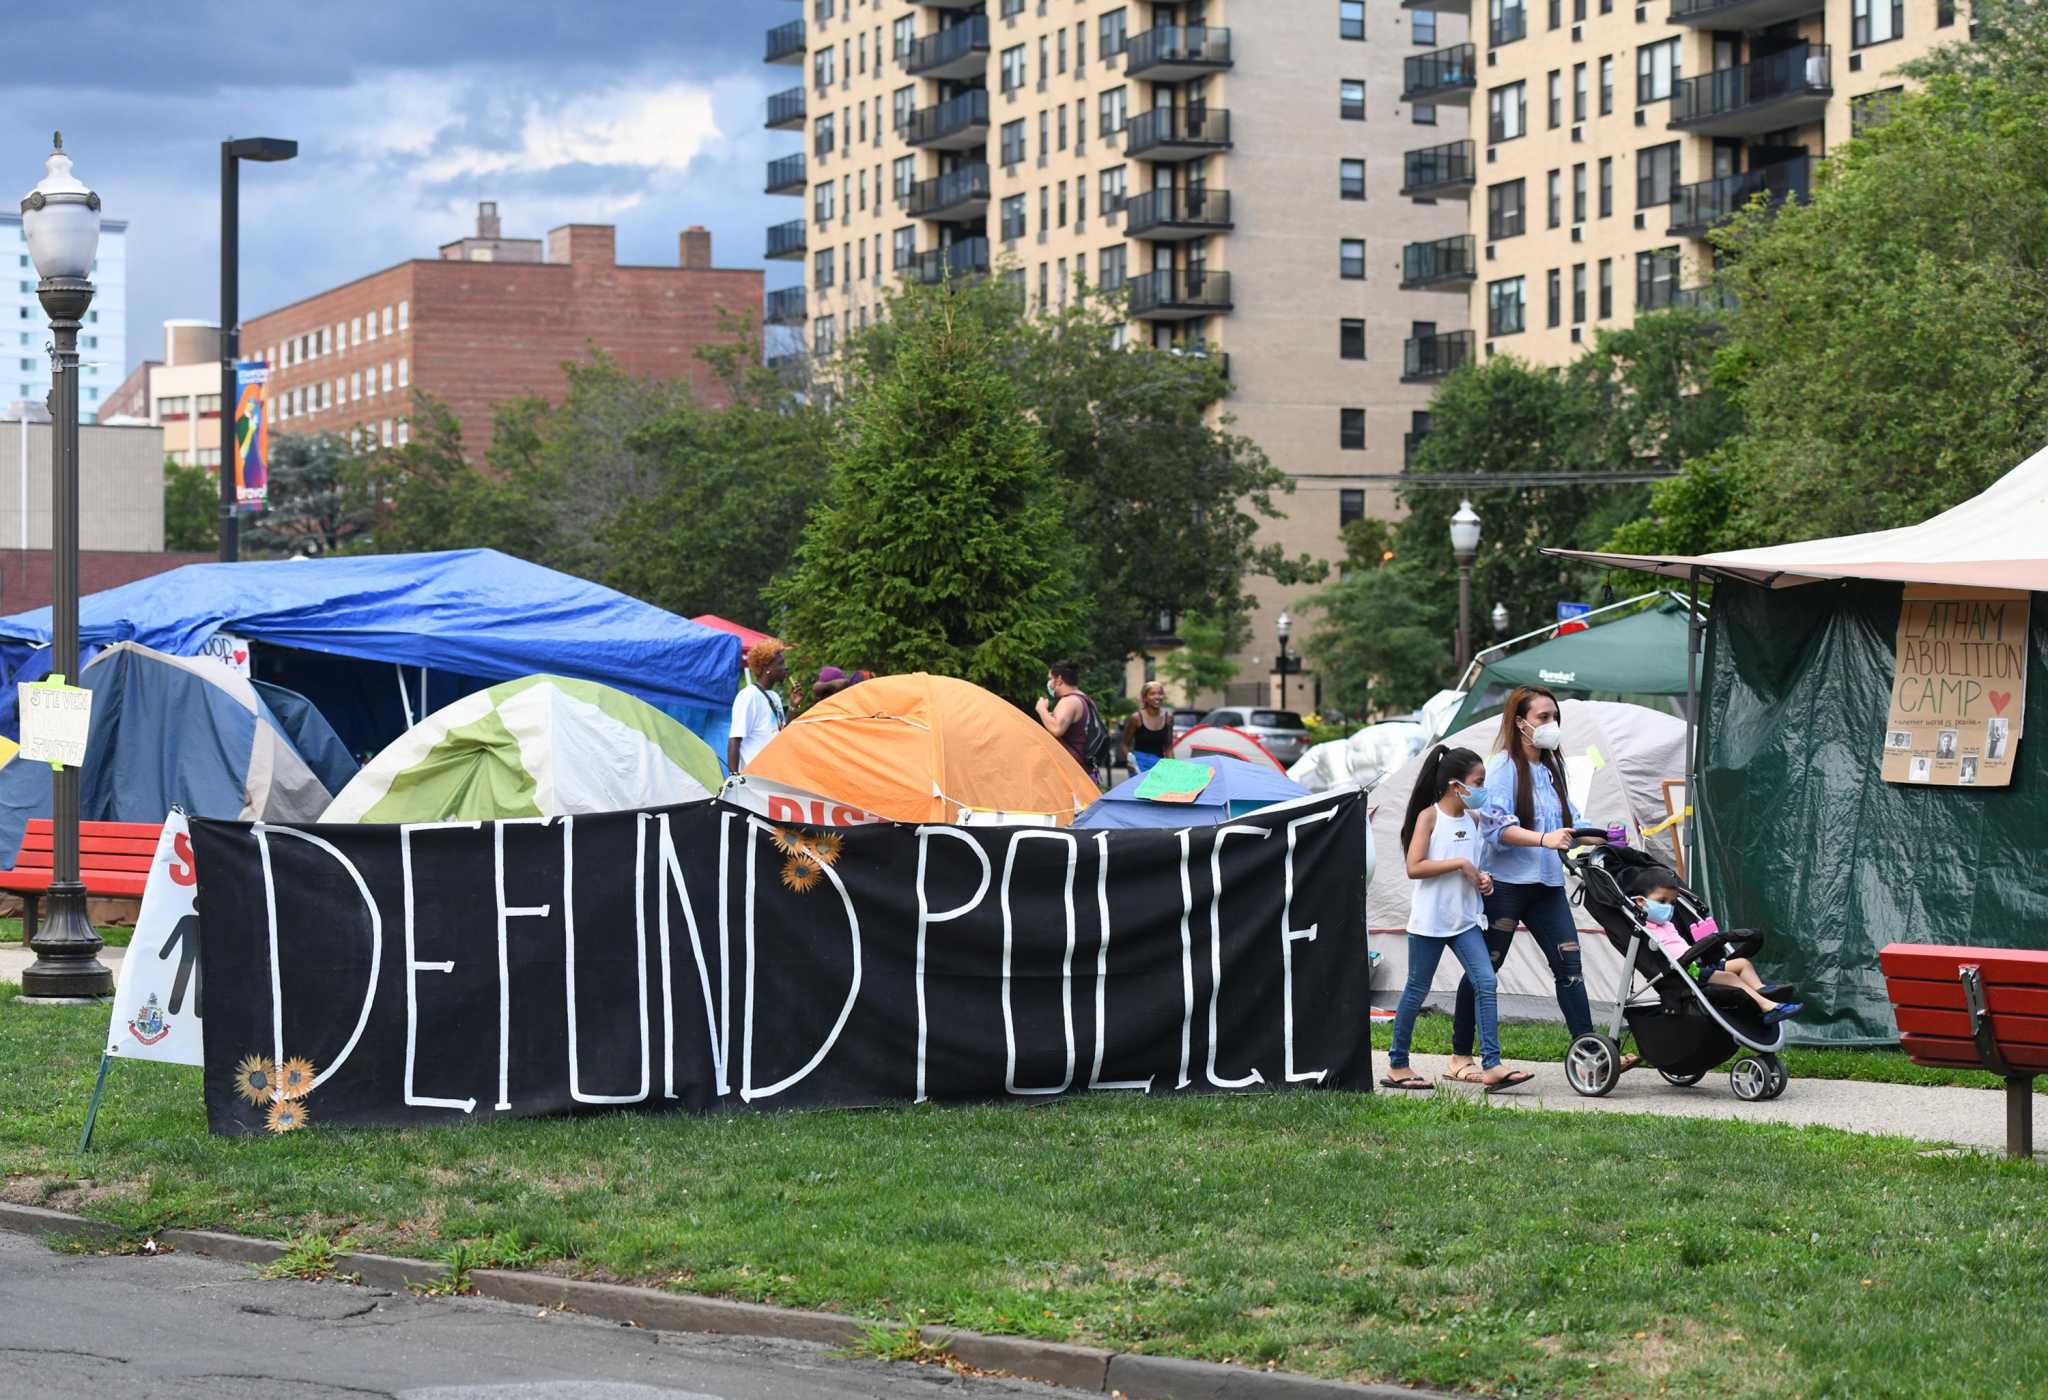 Stamford police order encamped protesters to leave Latham Park